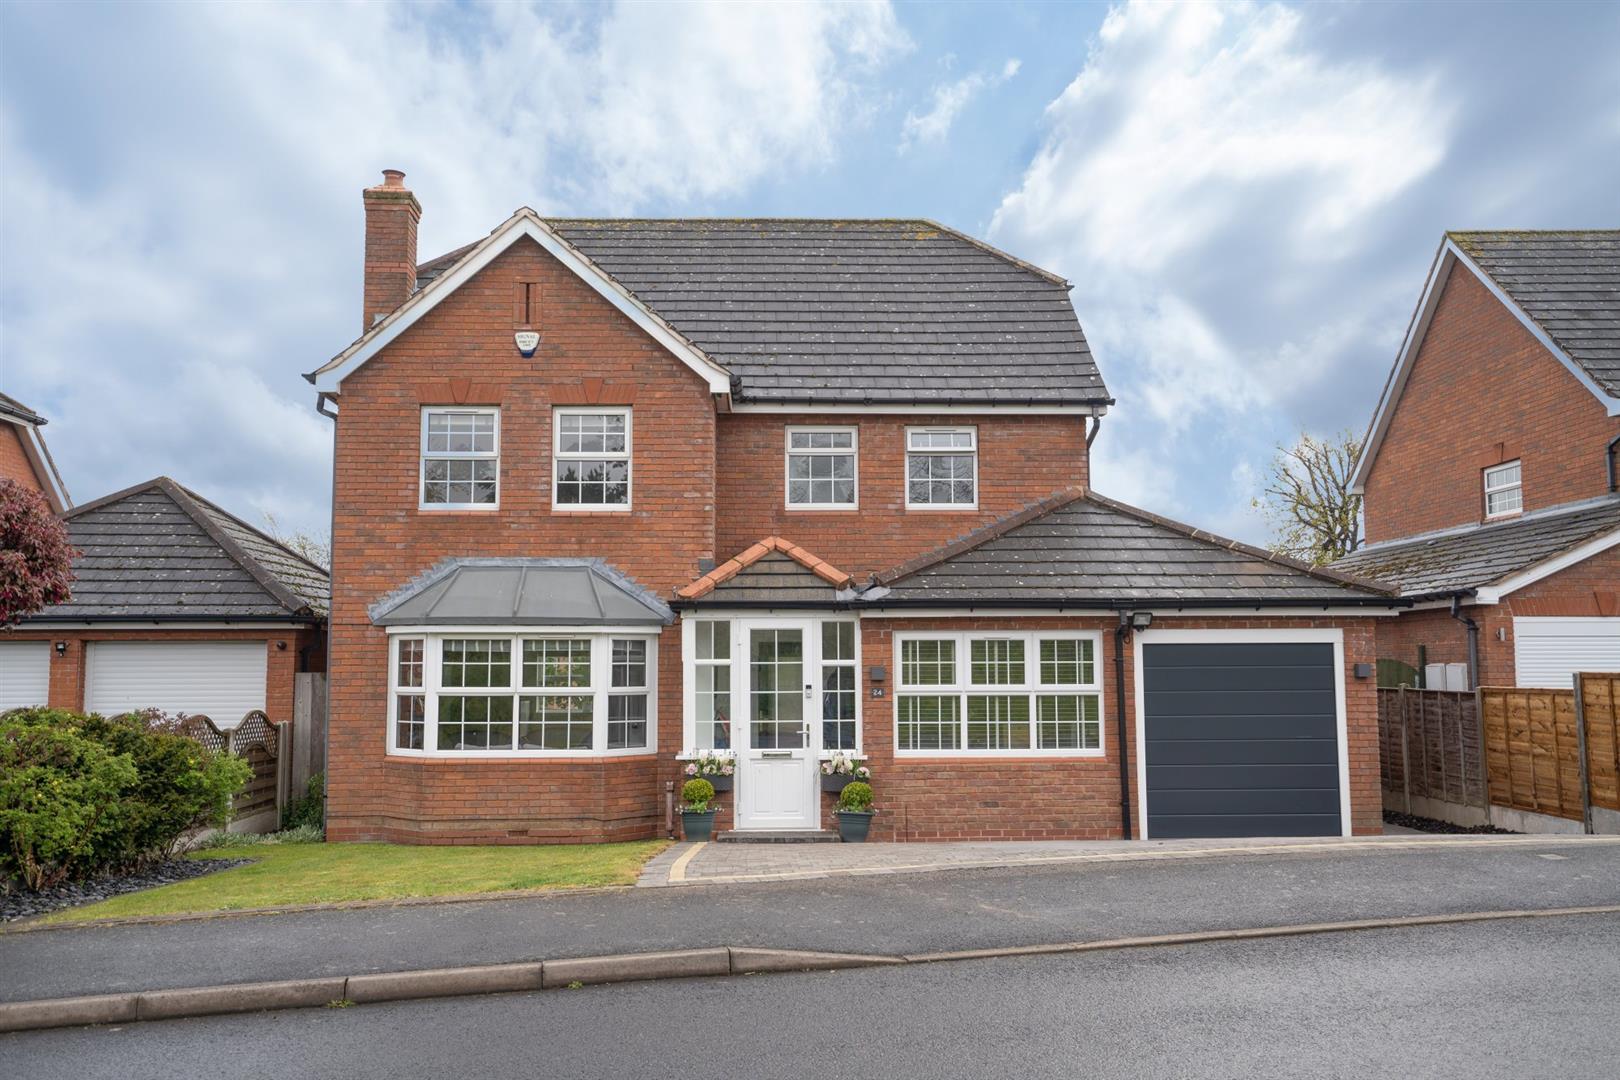 4 bed  for sale in St Francis Avenue, Solihull, B91 